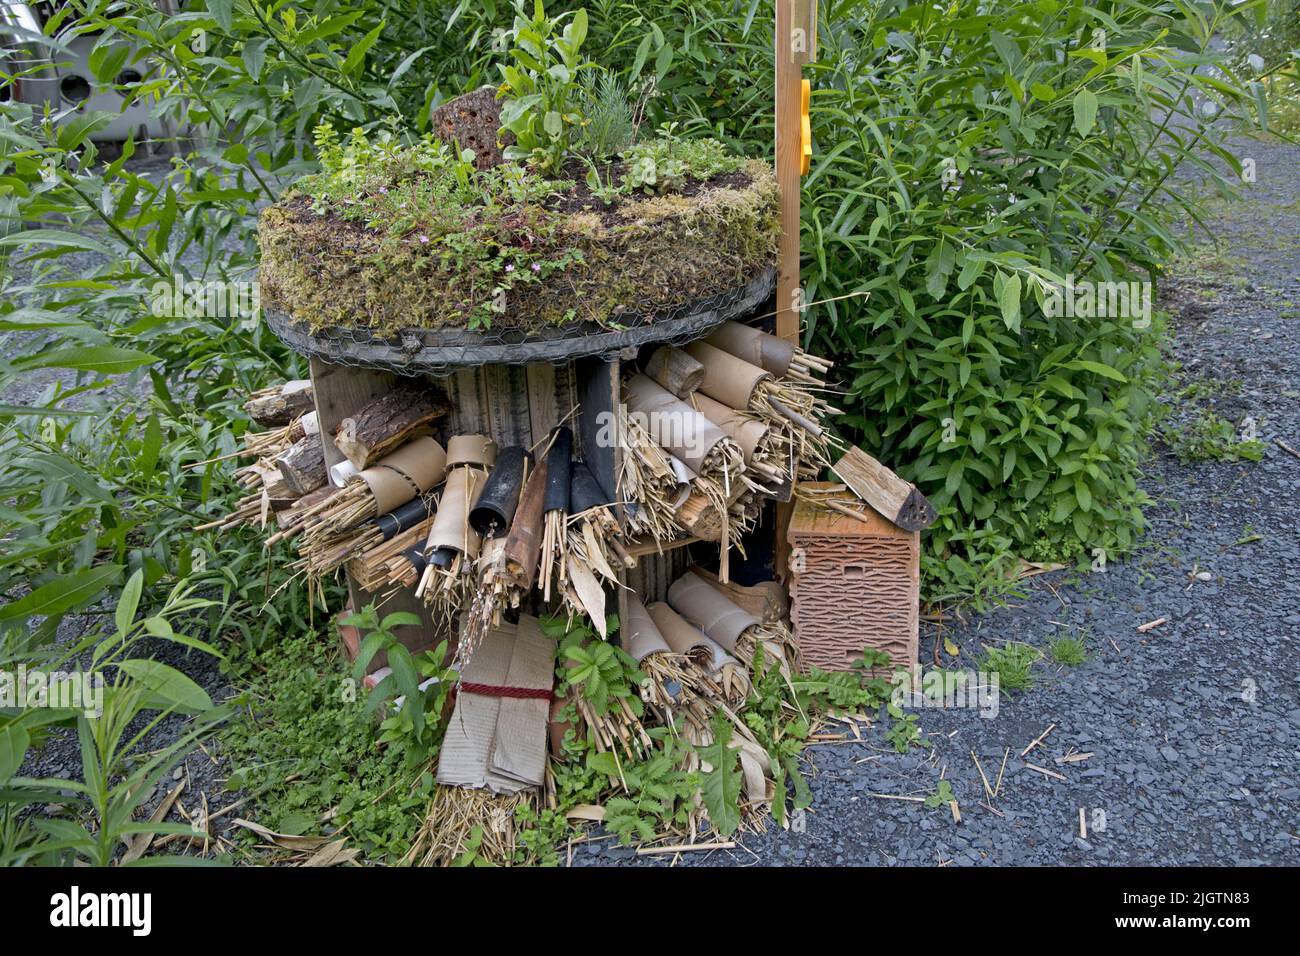 Large DIY insect hotel or bug house made from a range of natural materials Stock Photo